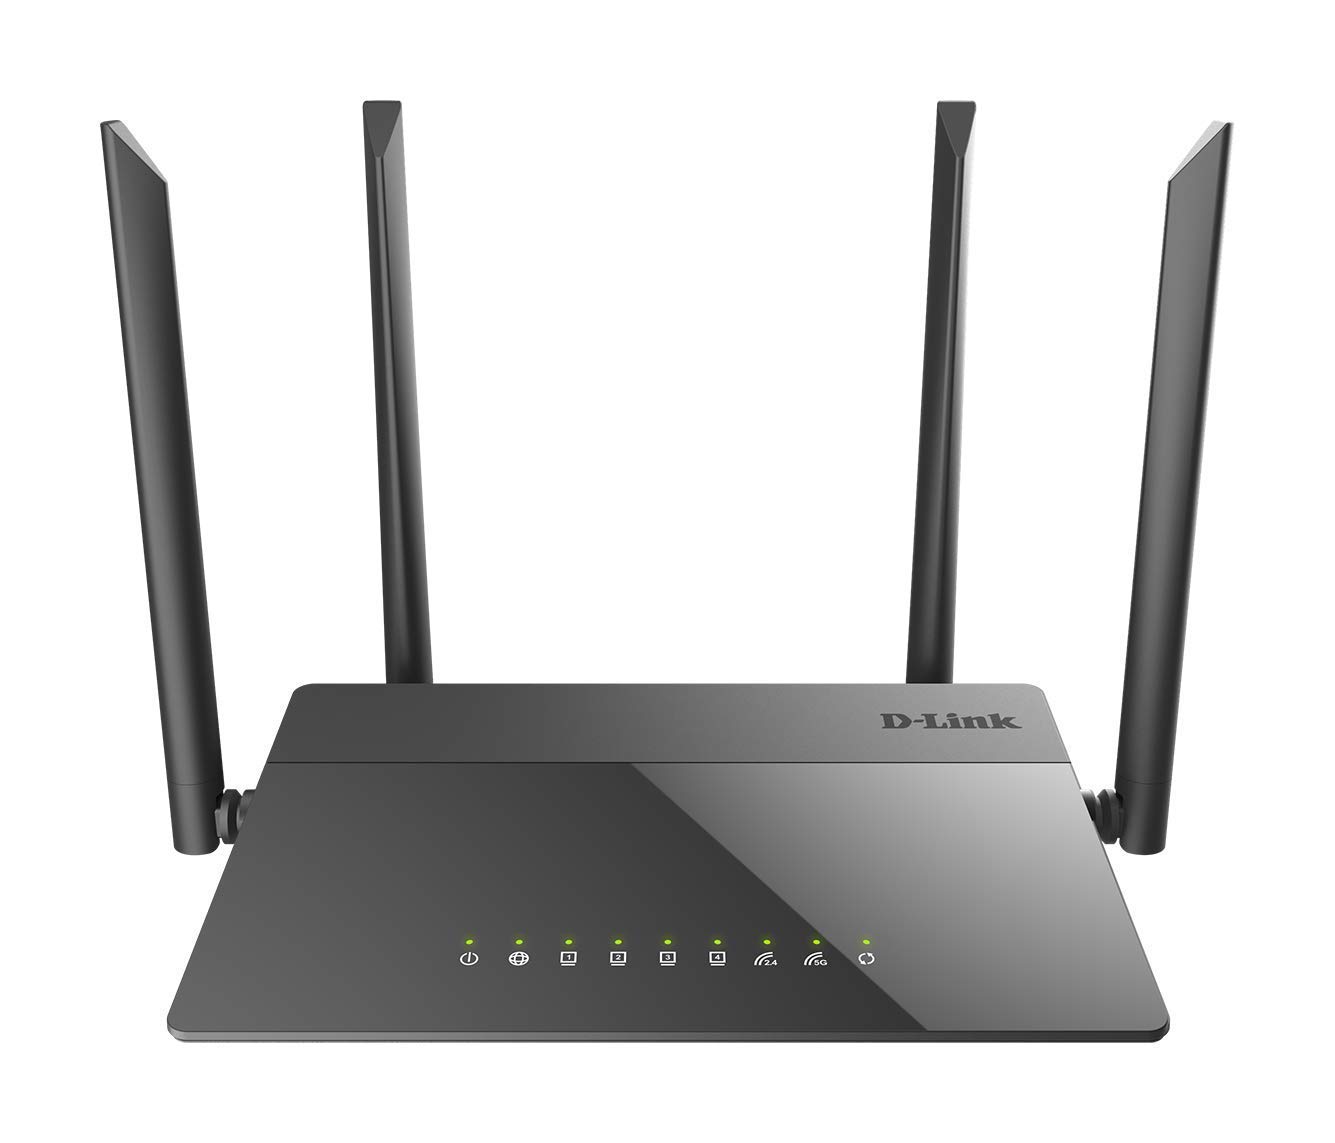 D-Link DIR-841 - AC1200 MU-MIMO Wi-Fi Gigabit Router with Fast Ethernet LAN Ports, Dual_Band, Black